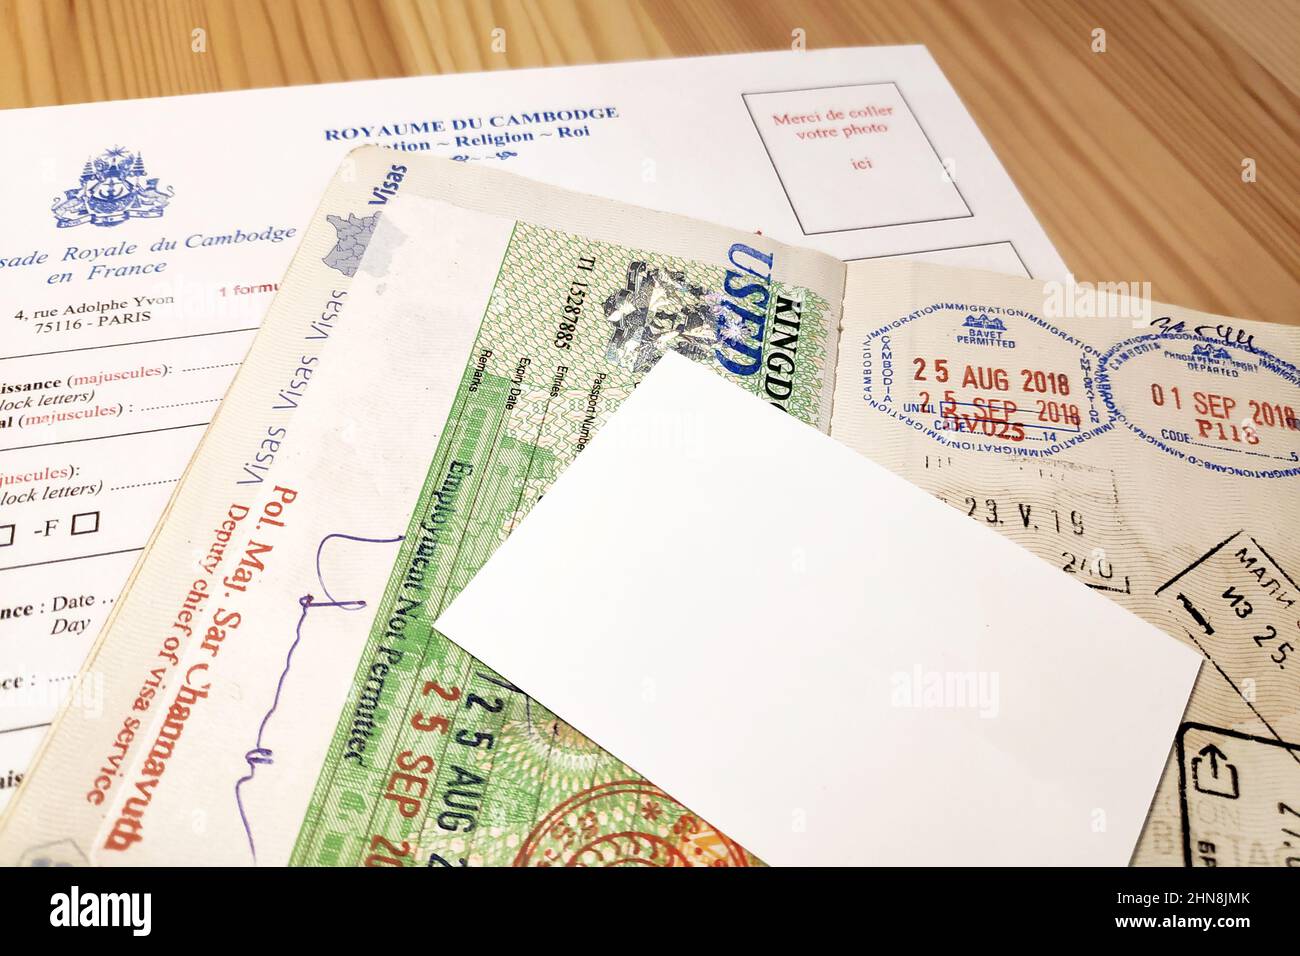 Opened French passport on the top of an application form for a Cambodian tourist visa. Stock Photo